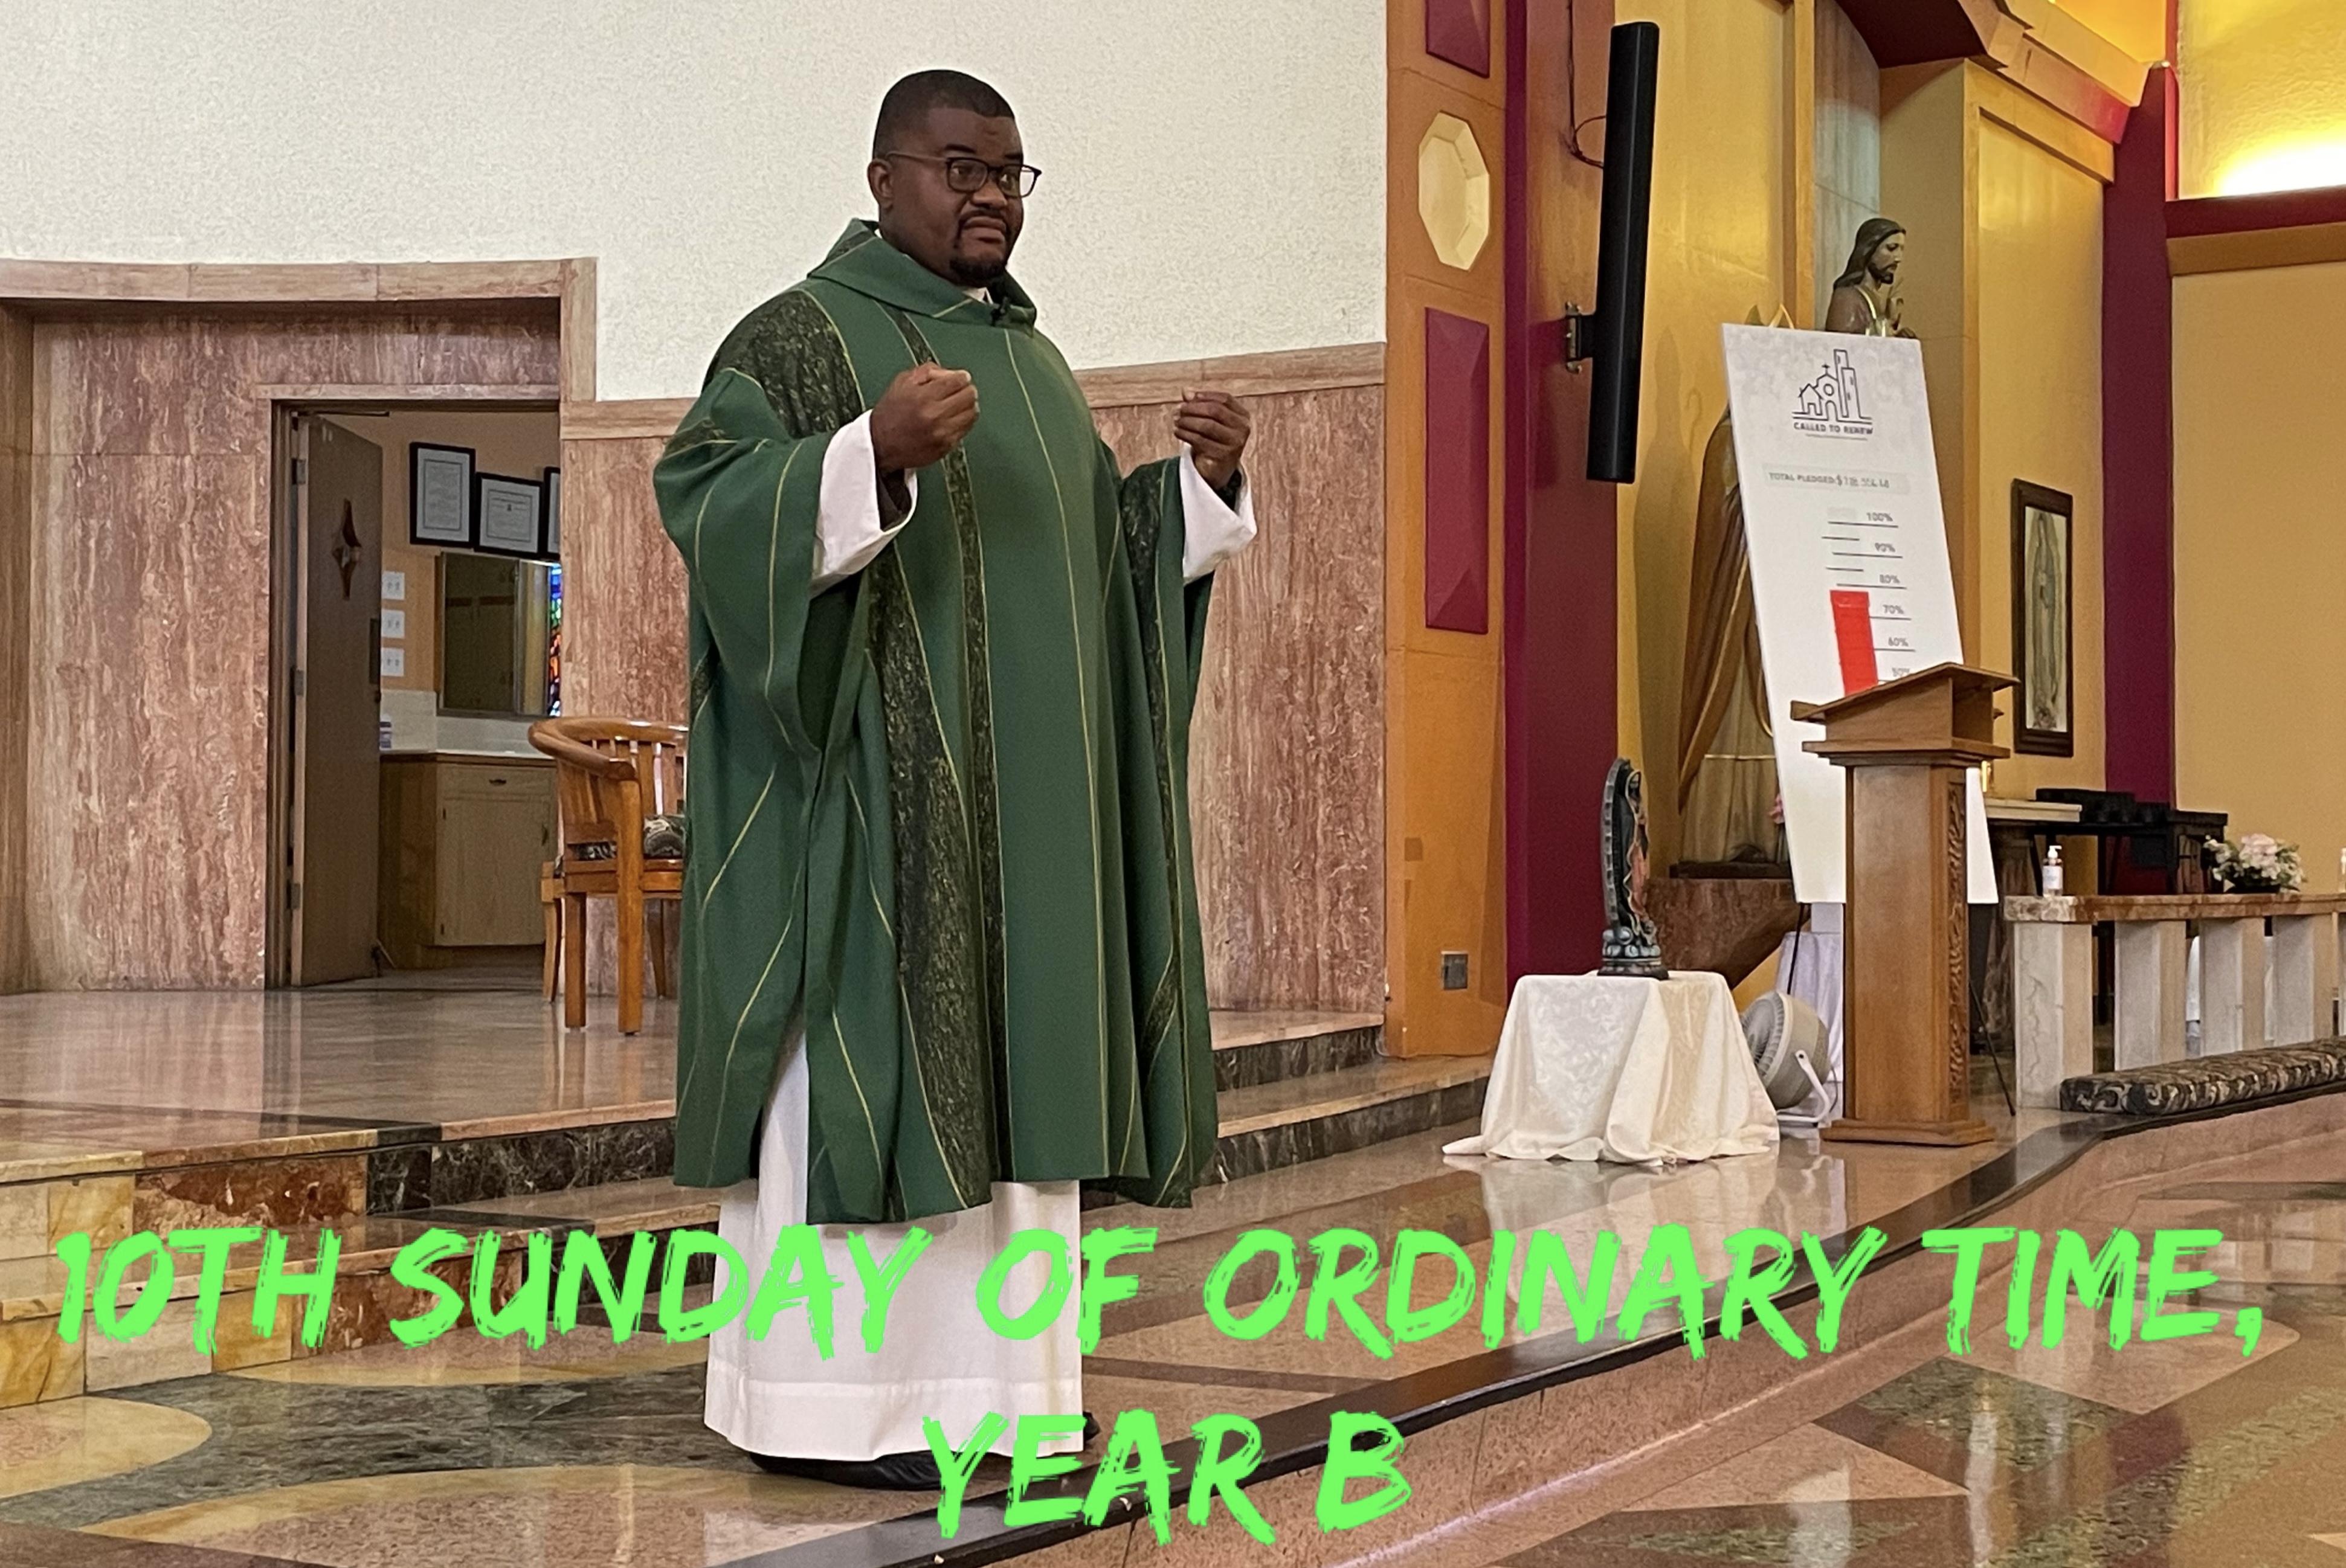 10th Sunday of Ordinary Time, Year B